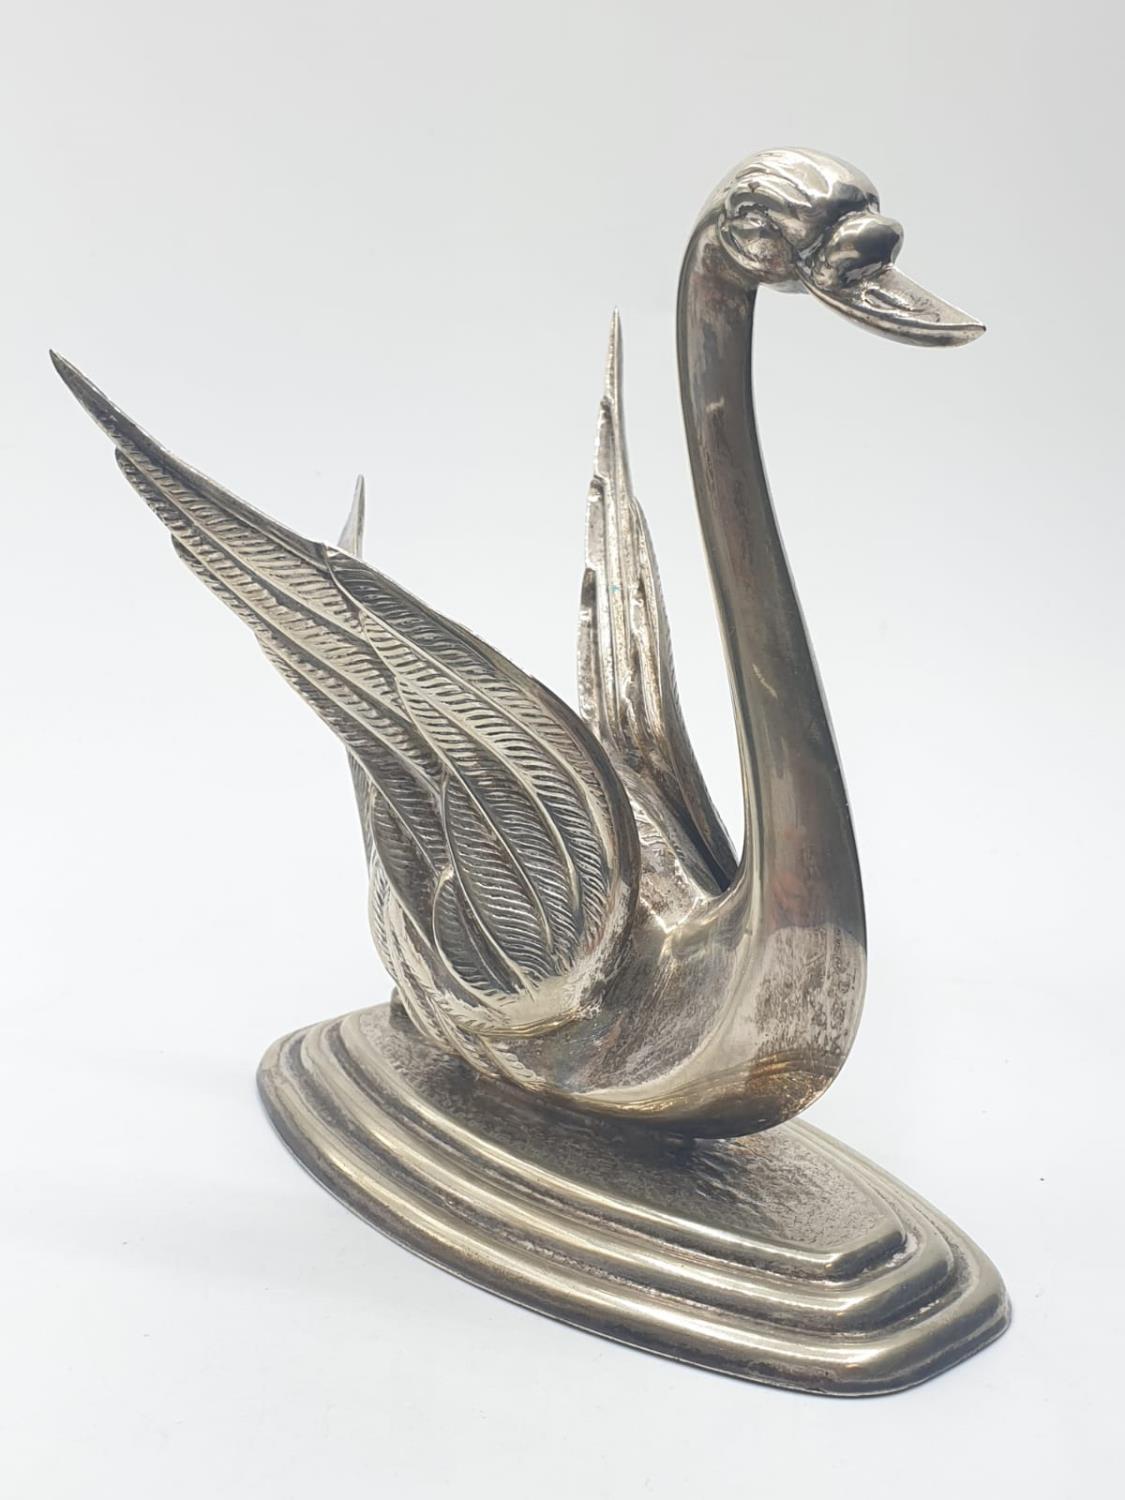 Silver BRANDY WARMER in the form of a swan. 290g - Image 2 of 4